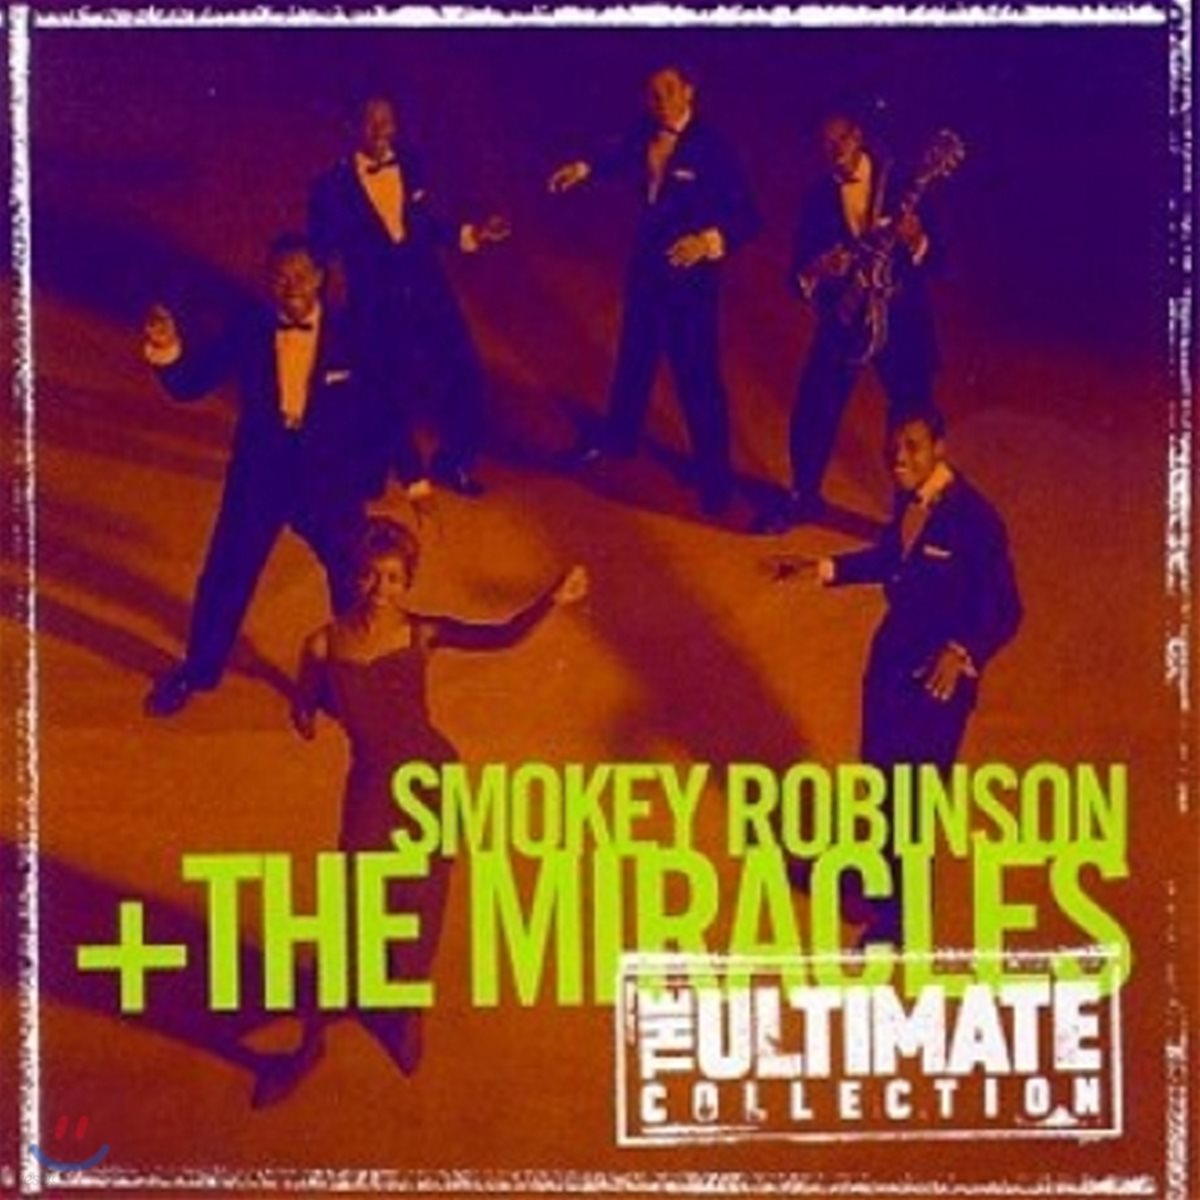 Smokey Robinson &amp; The Miracles - Ultimate Collection